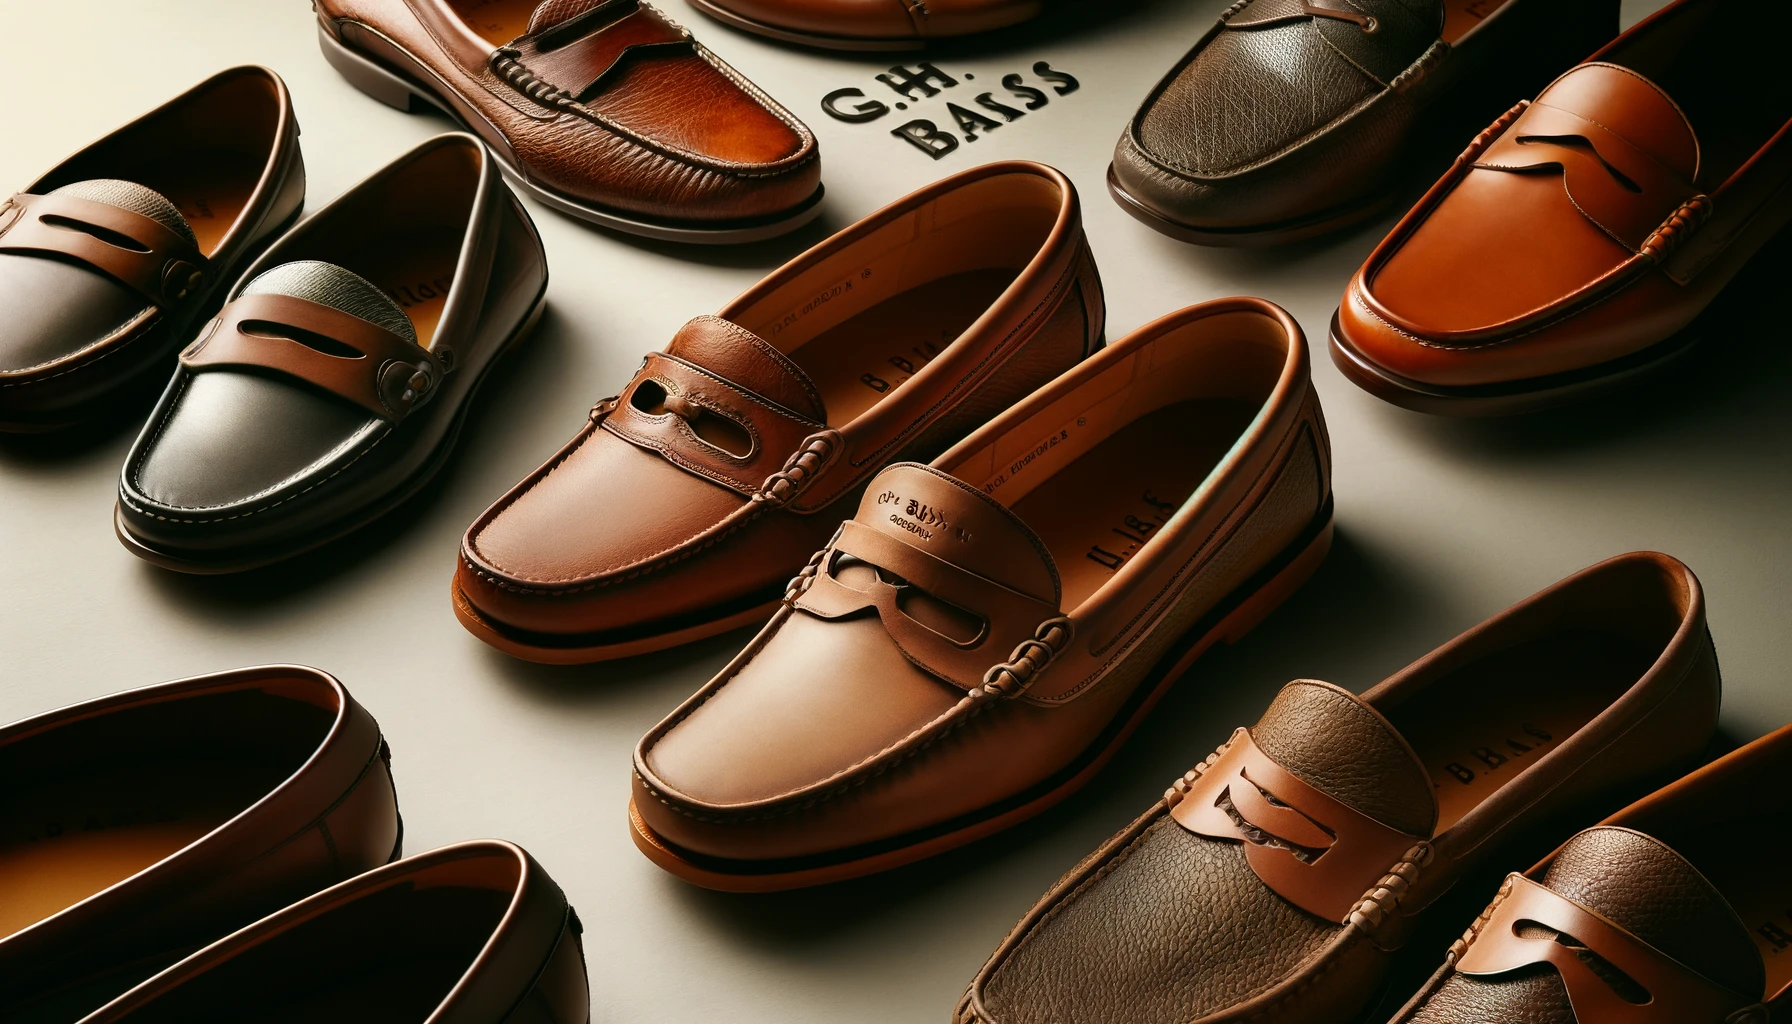 A showcase of iconic G.H.BASS leather loafer models. The image features the most representative styles, highlighting their unique designs and details. The loafers are displayed prominently with a clean and elegant background, emphasizing their heritage and craftsmanship. Include the text 'G.H.BASS' prominently in the image.